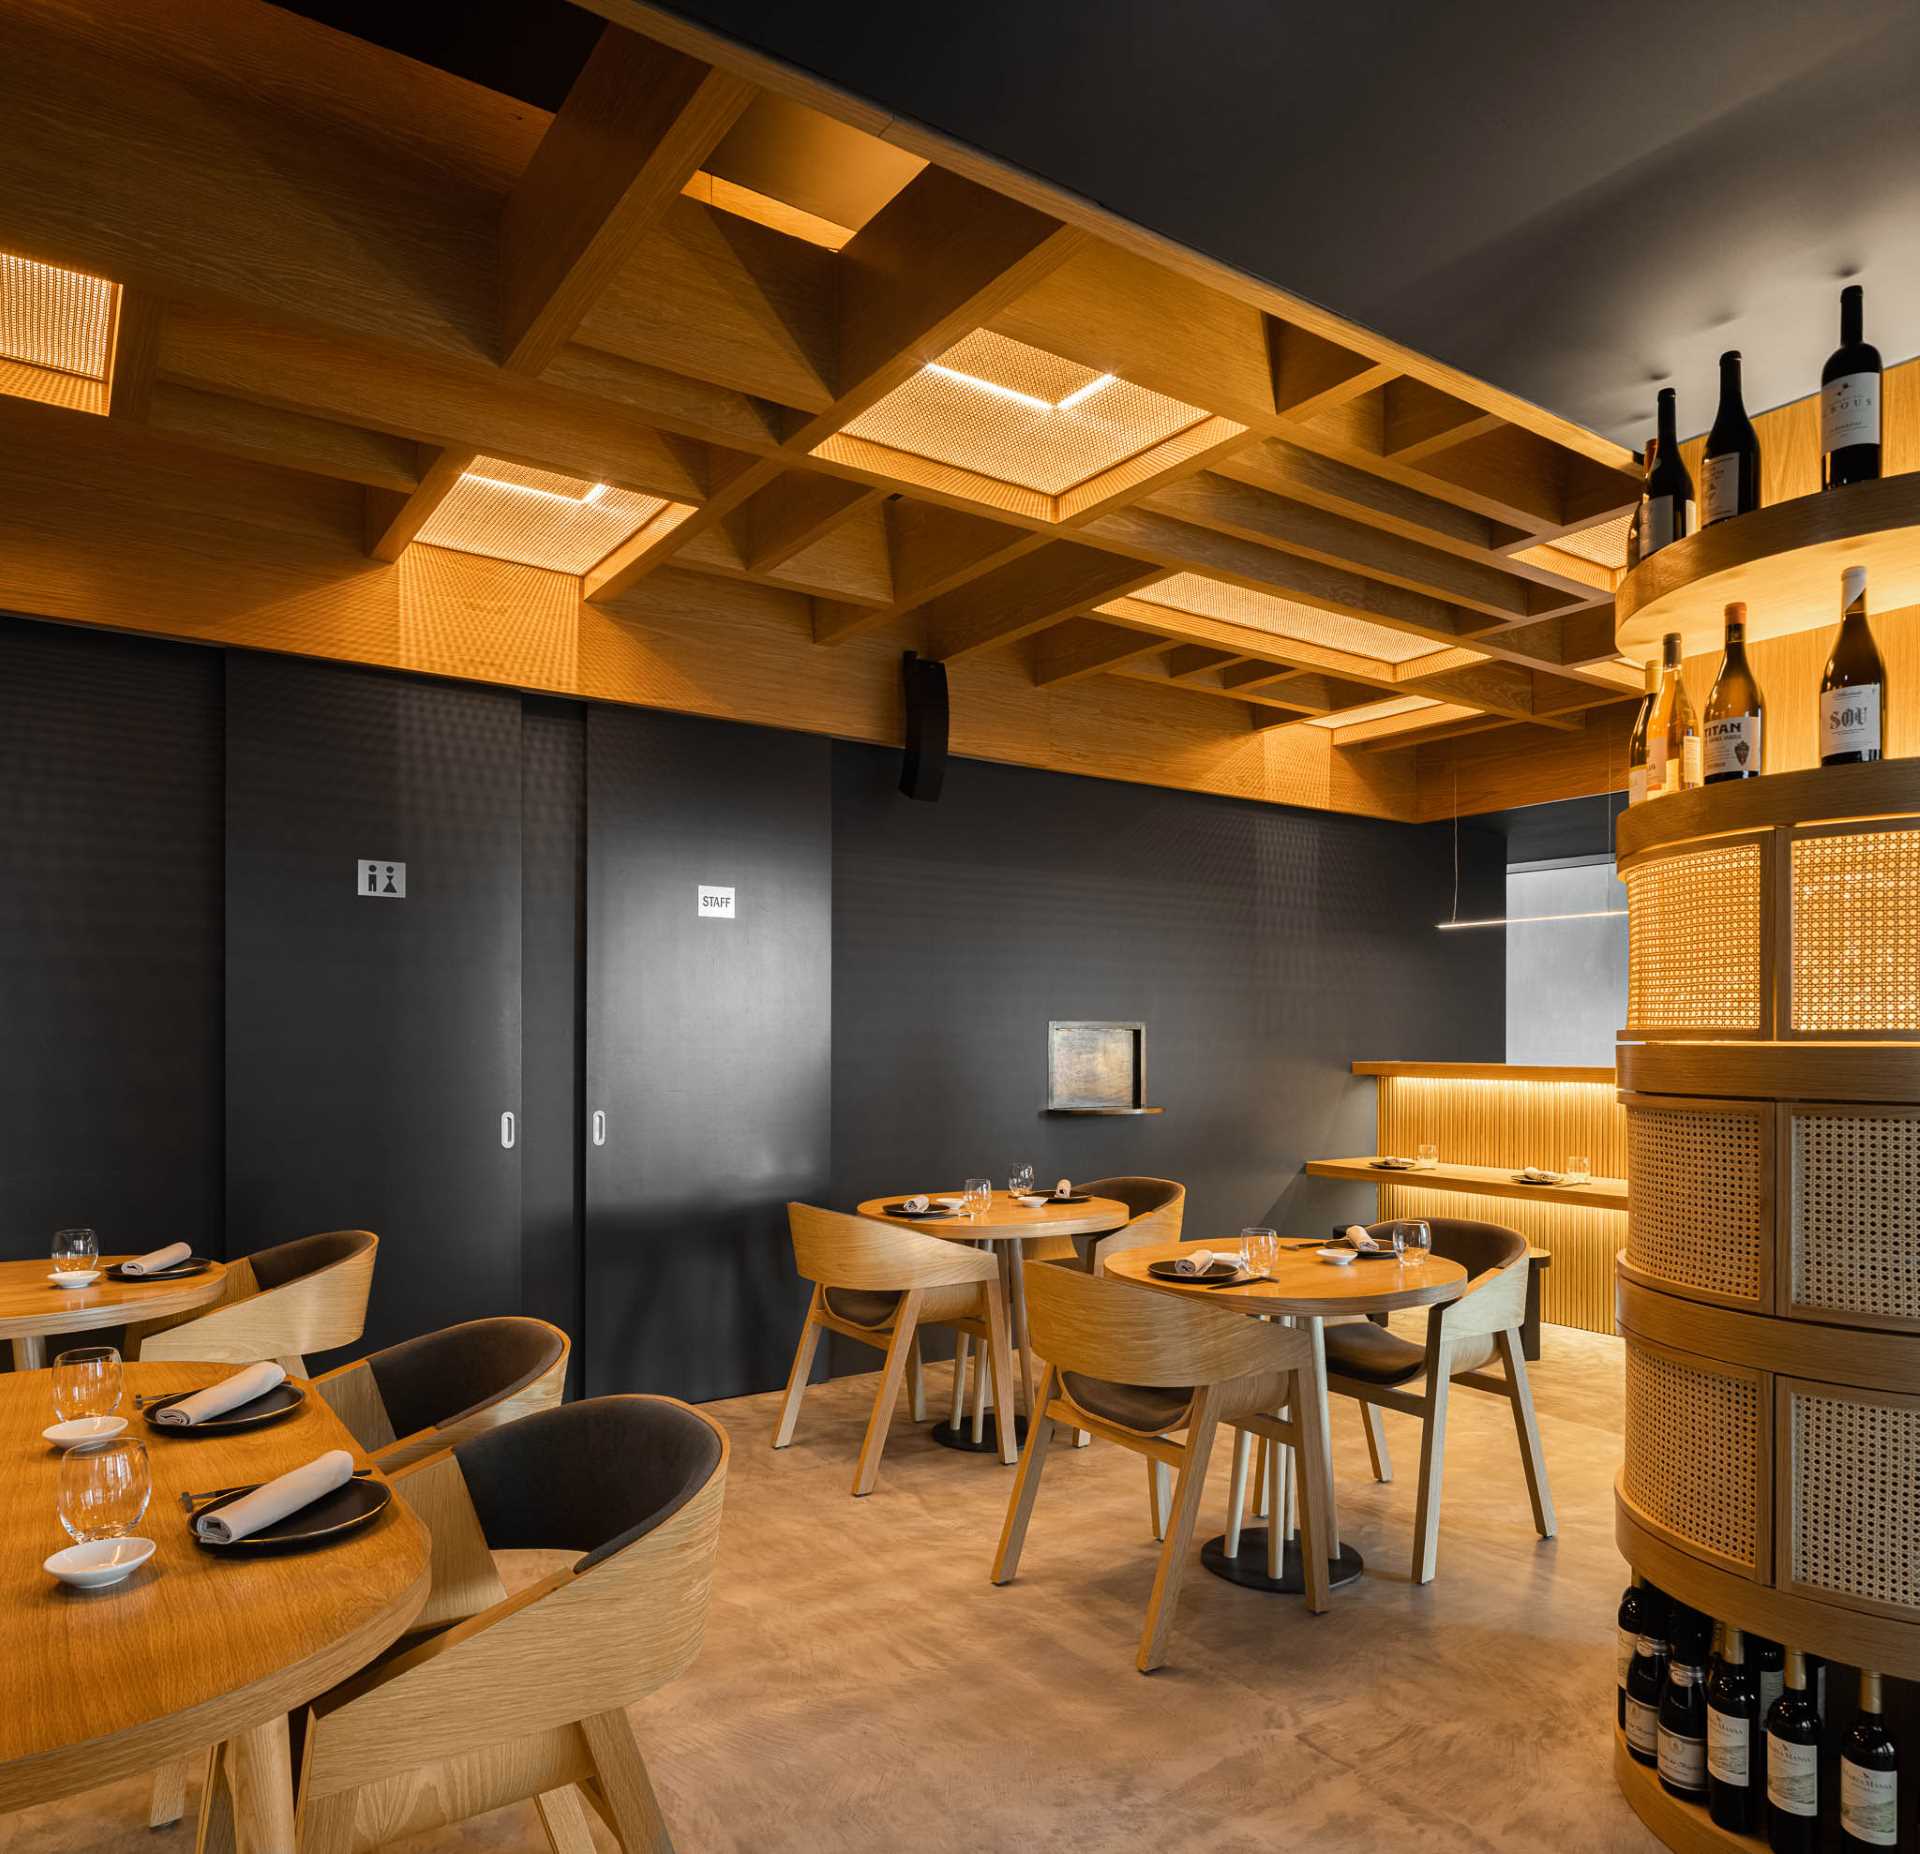 A modern restaurant interior with dark walls, wood accents, and straw panels.